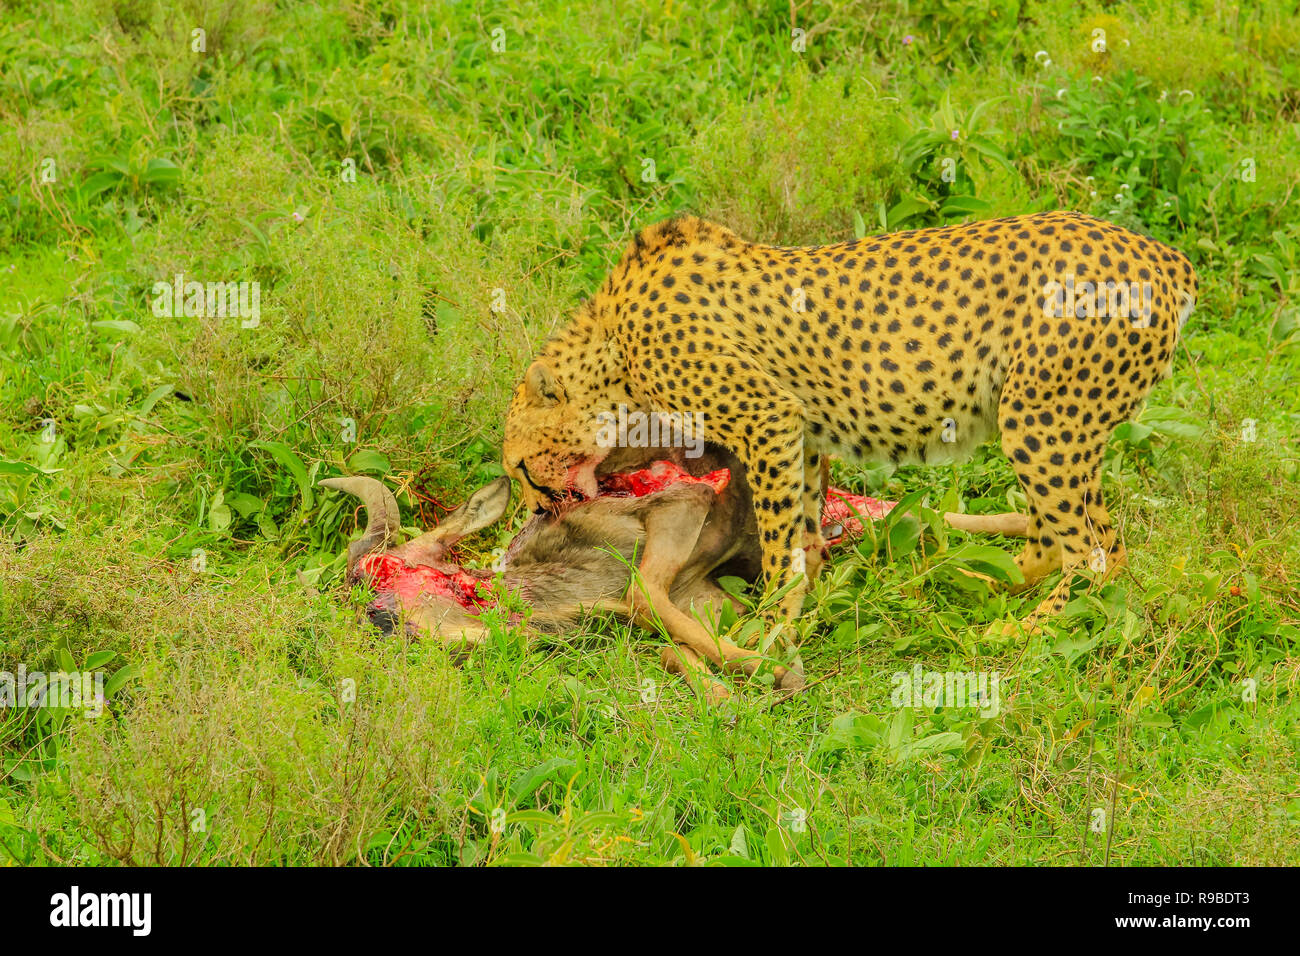 Cheetah male eats a young Gnu or Wildebeest in green grass vegetation. Ndutu Area of Ngorongoro Conservation Area, Tanzania, Africa. Stock Photo